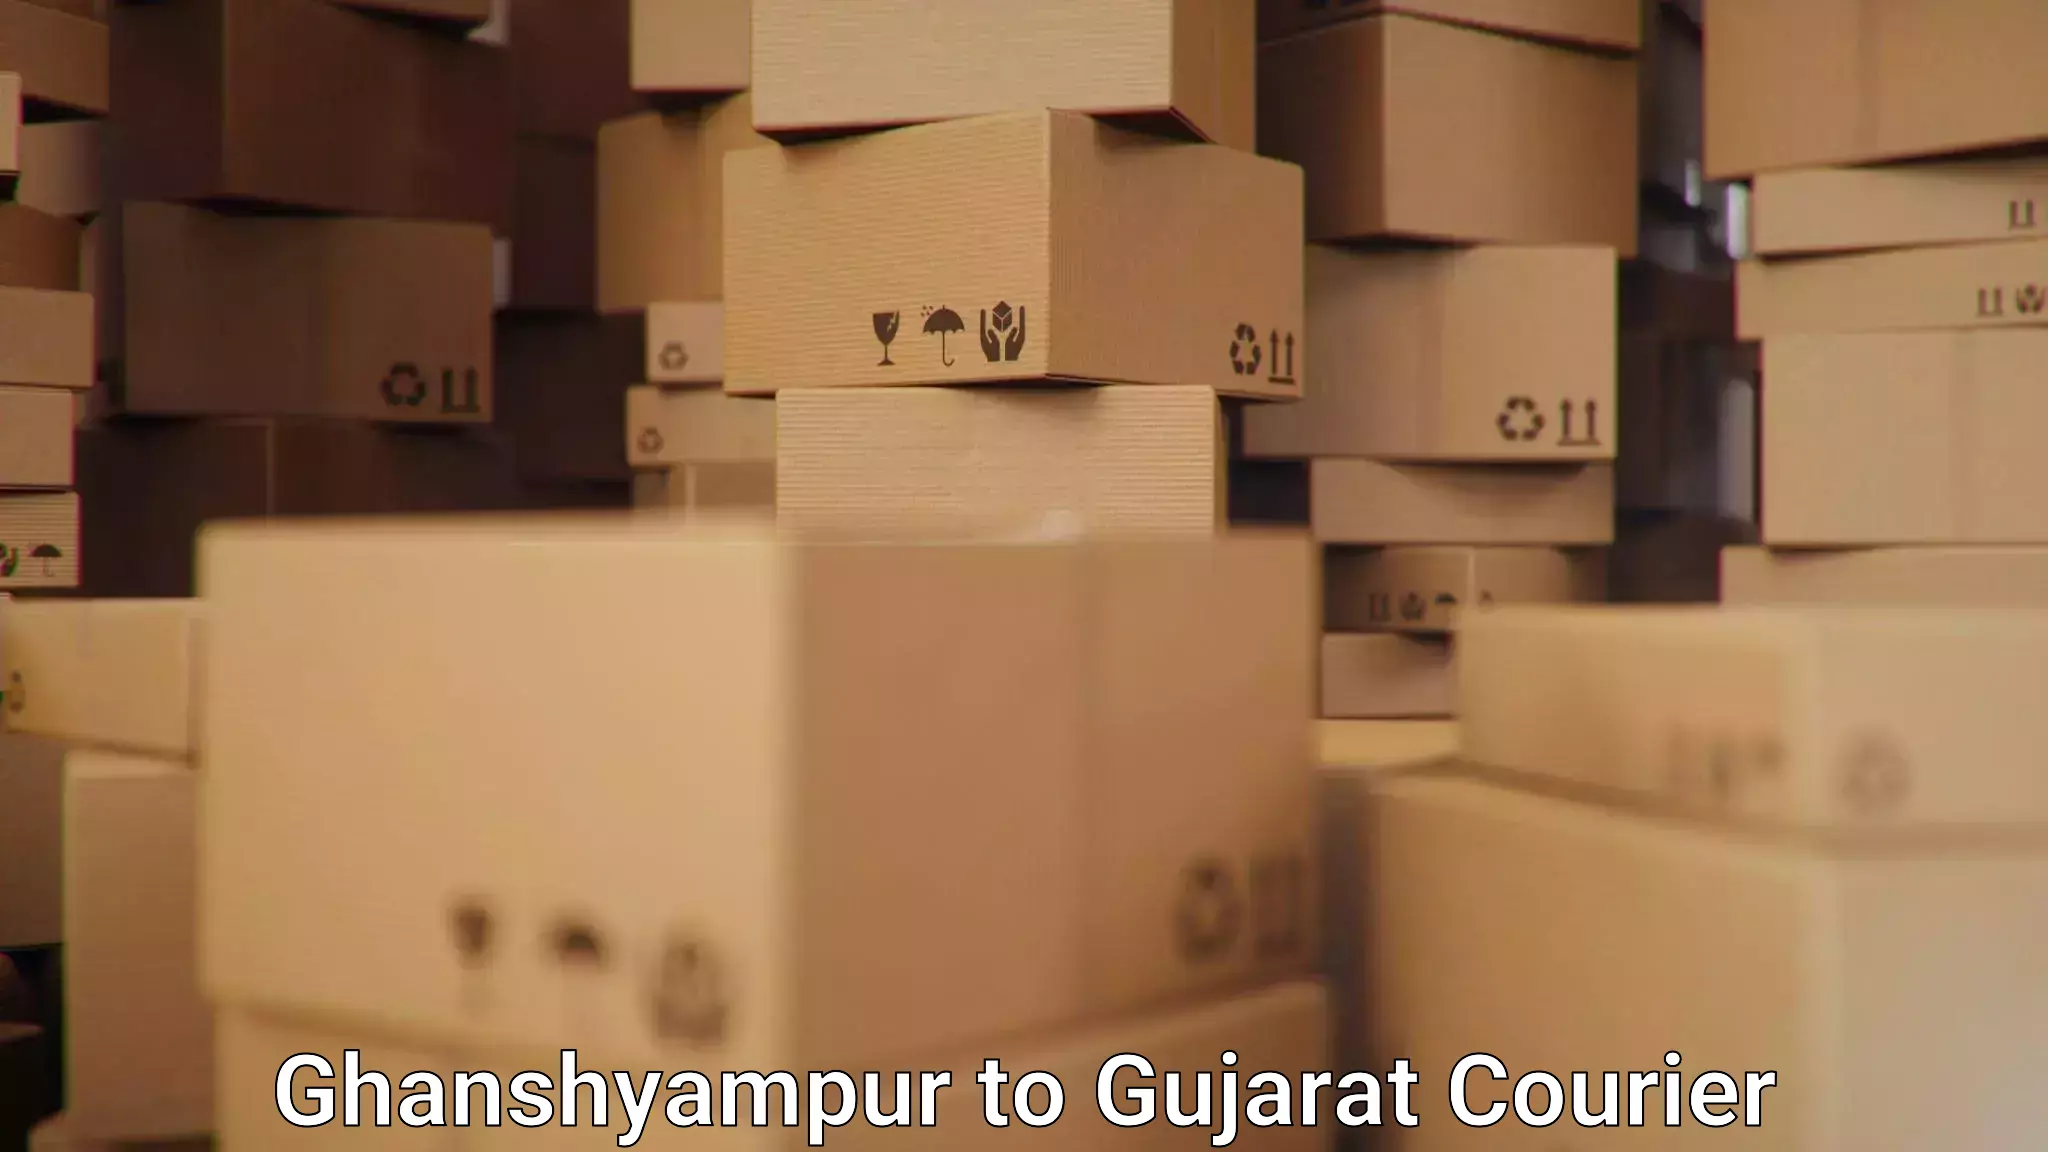 Personal courier services in Ghanshyampur to Ambaji